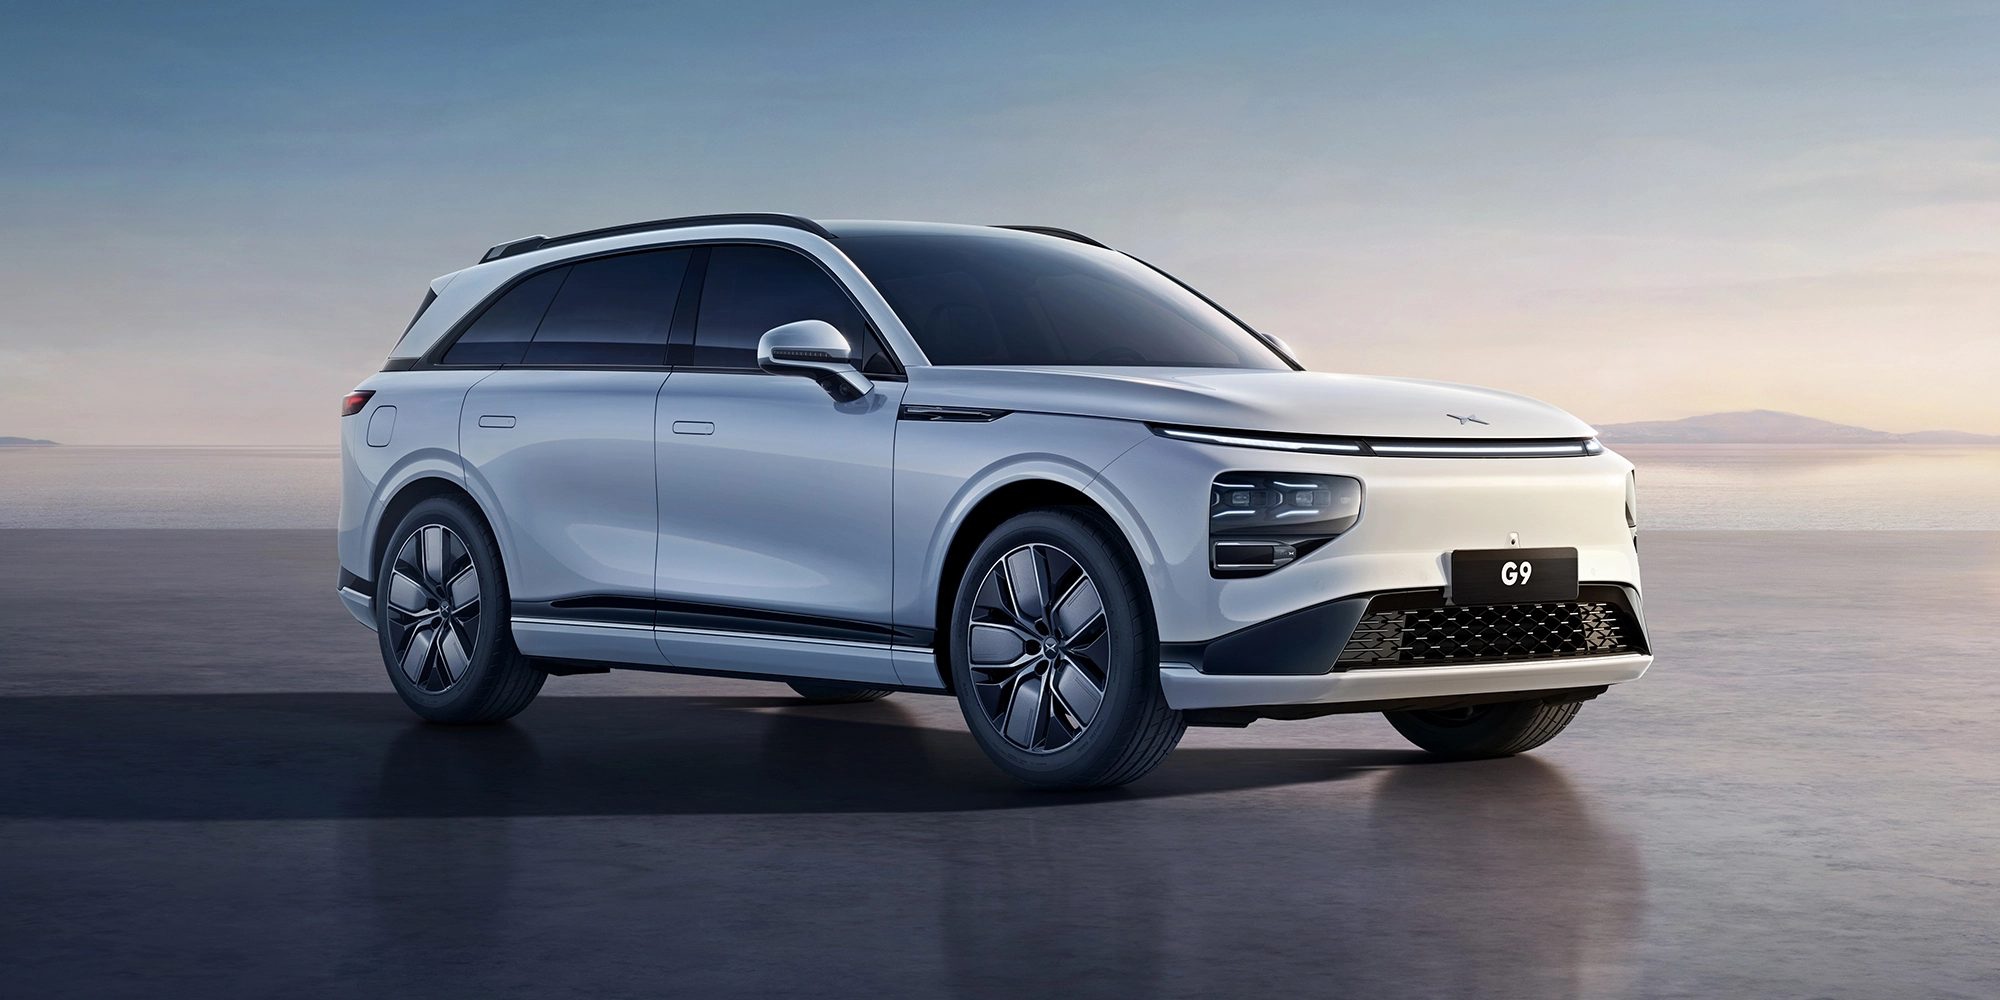 Xpeng G9: electric crossover SUV with a range of 200 km in 5 minutes of charging and a 5-star NCAP safety rating